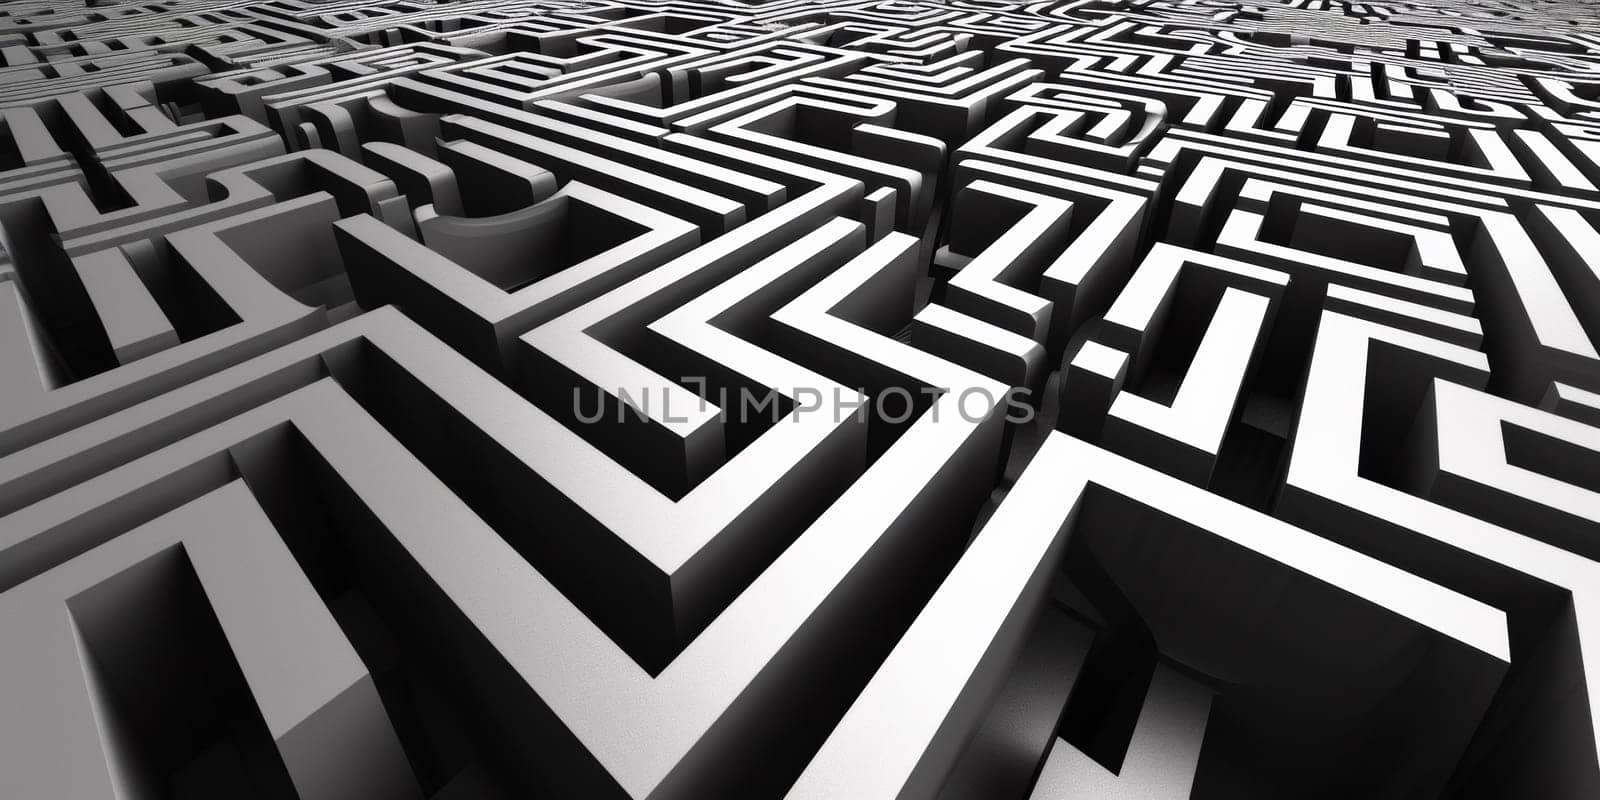 A large maze with many different shapes and sizes